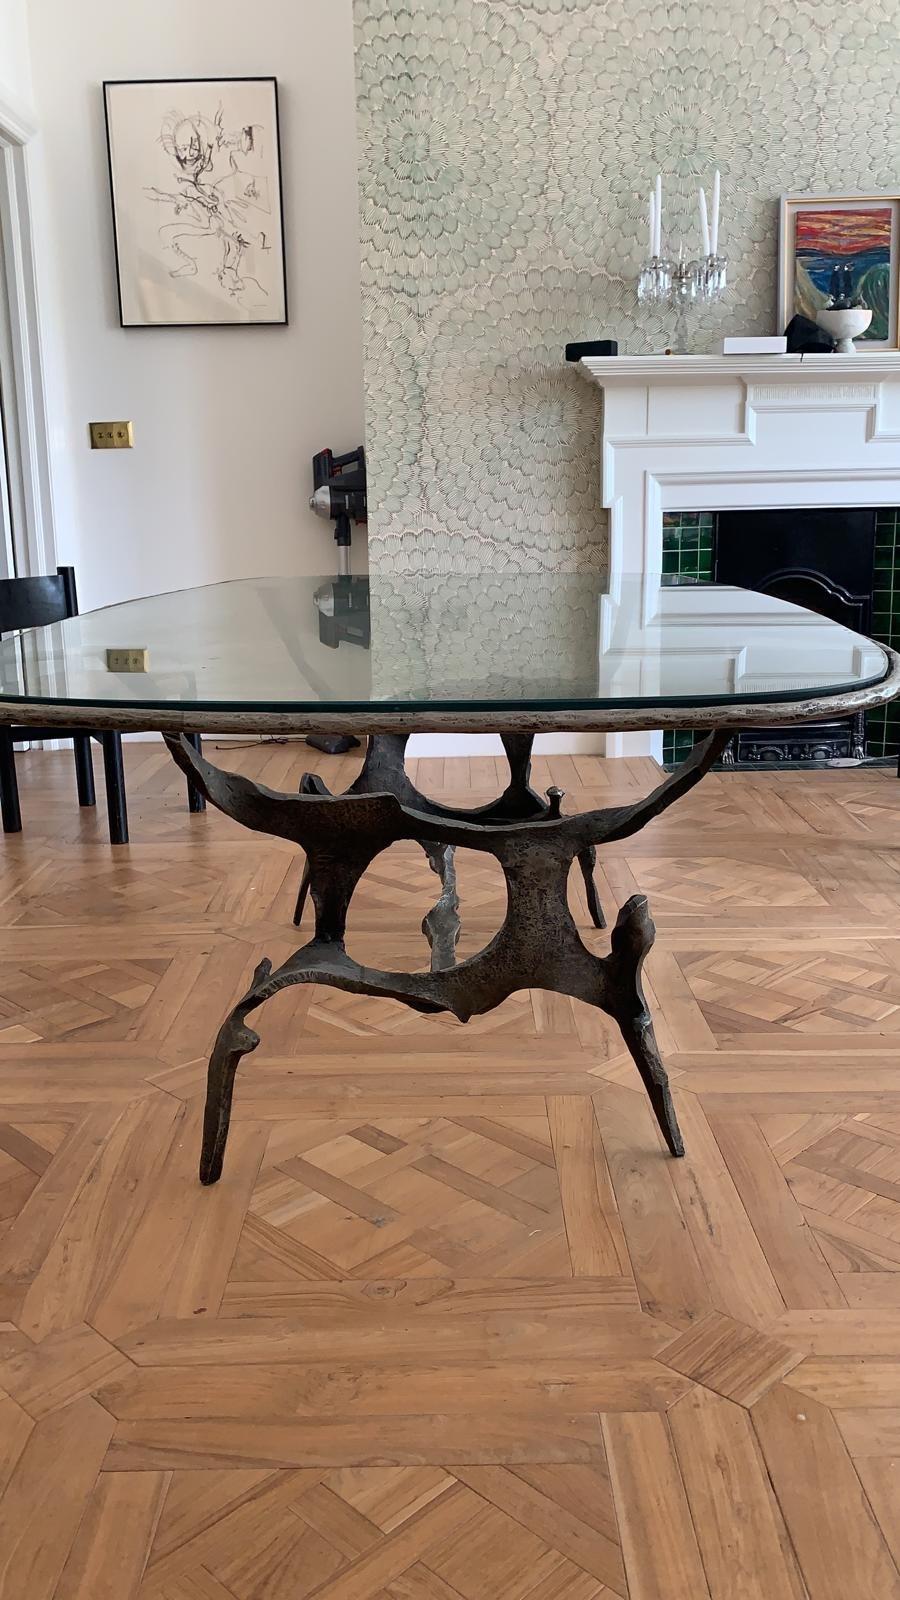 Rare table by Francois Thevenin 
Sculptural bronze base with black patina, original glass top with radial corners. There are small fitted leather pads on feet and arms. Signed . Sculptural base measures

The metal tamer
François Thévenin is an